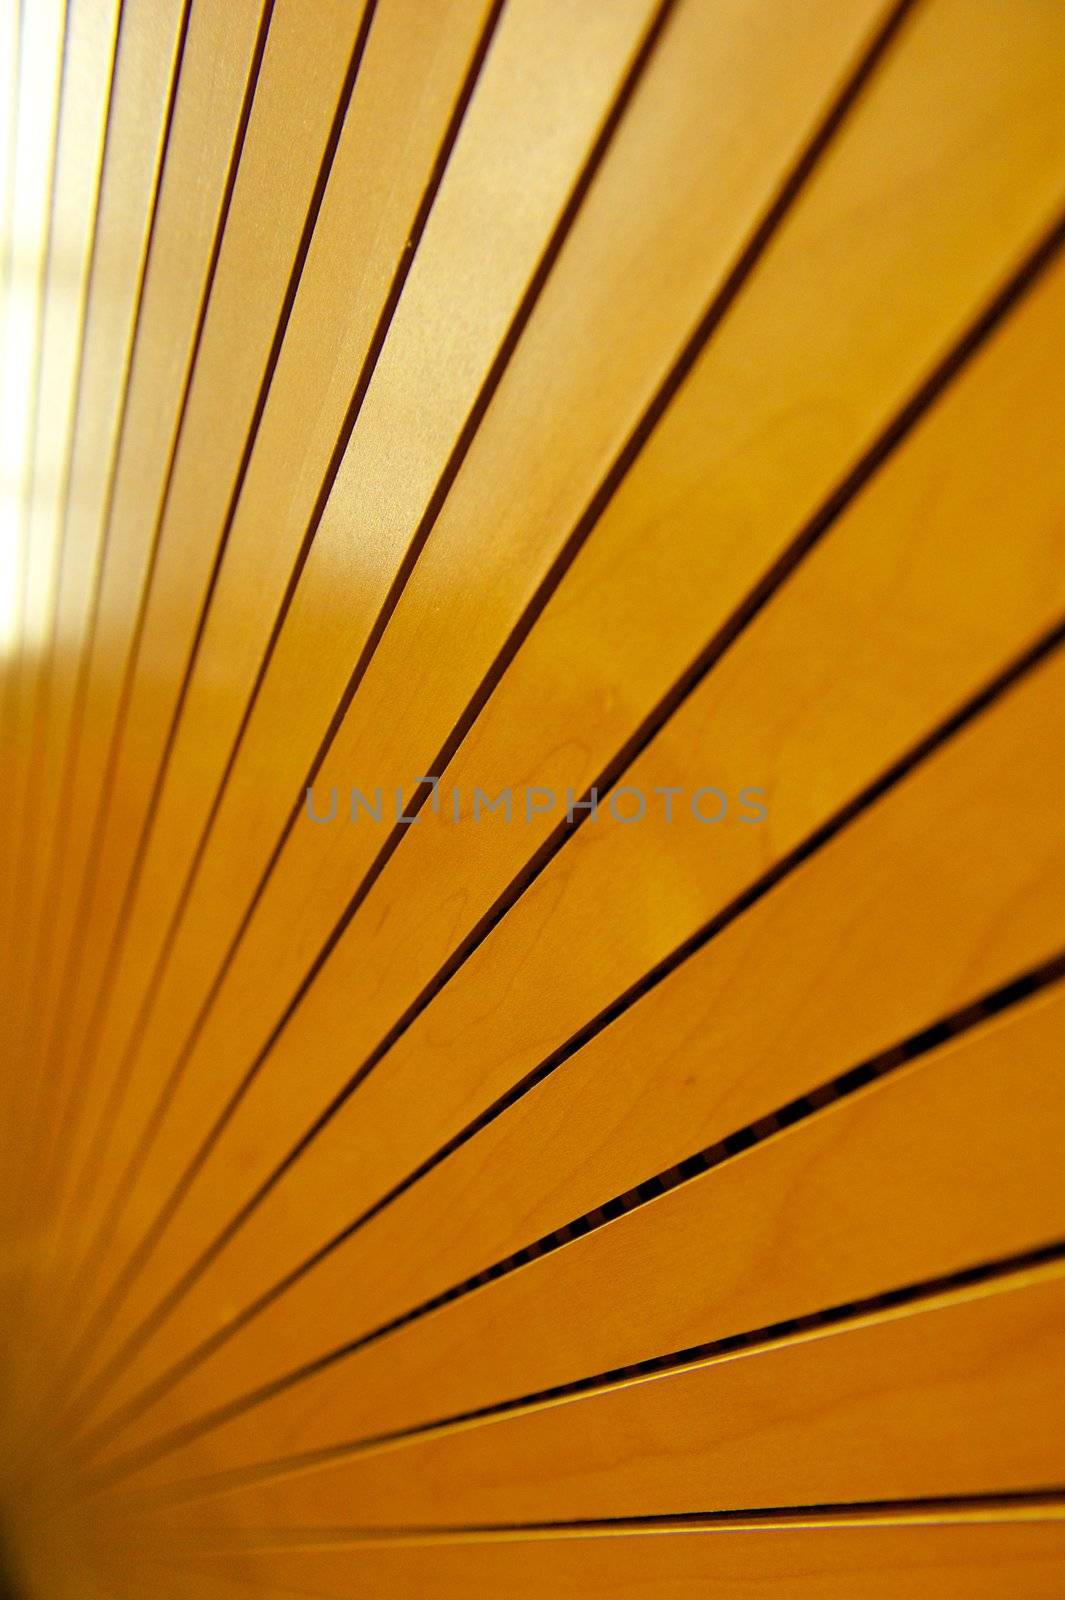 Rows of Golden Tightly Fitted Wooden Slats Background by pixelsnap